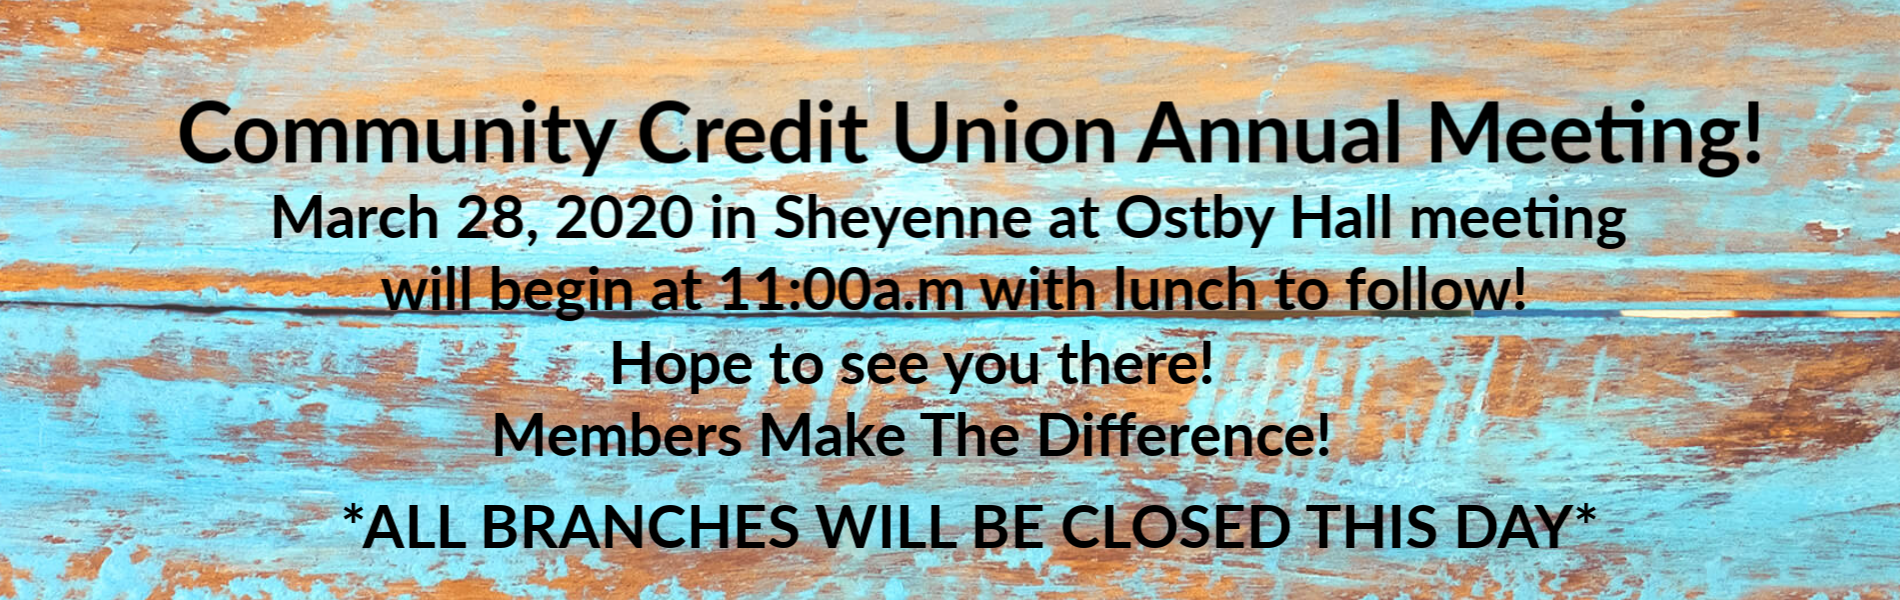 ANNUAL MEETING ONLINE - Community Credit Union